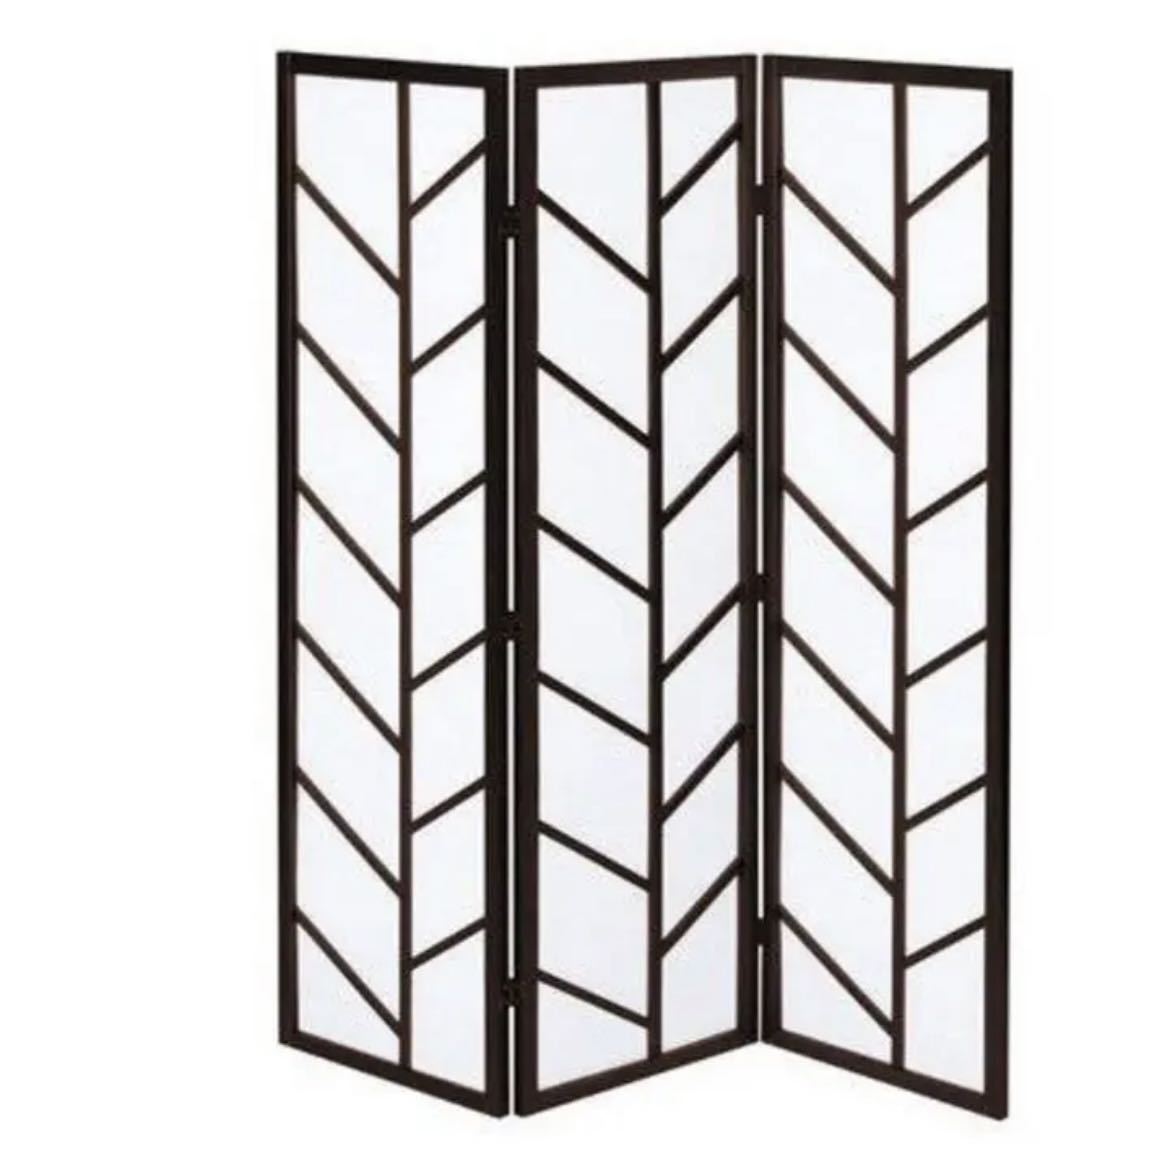  modern partitioning screen 3 ream partition eyes .. bulkhead . Japanese style / Brown white 